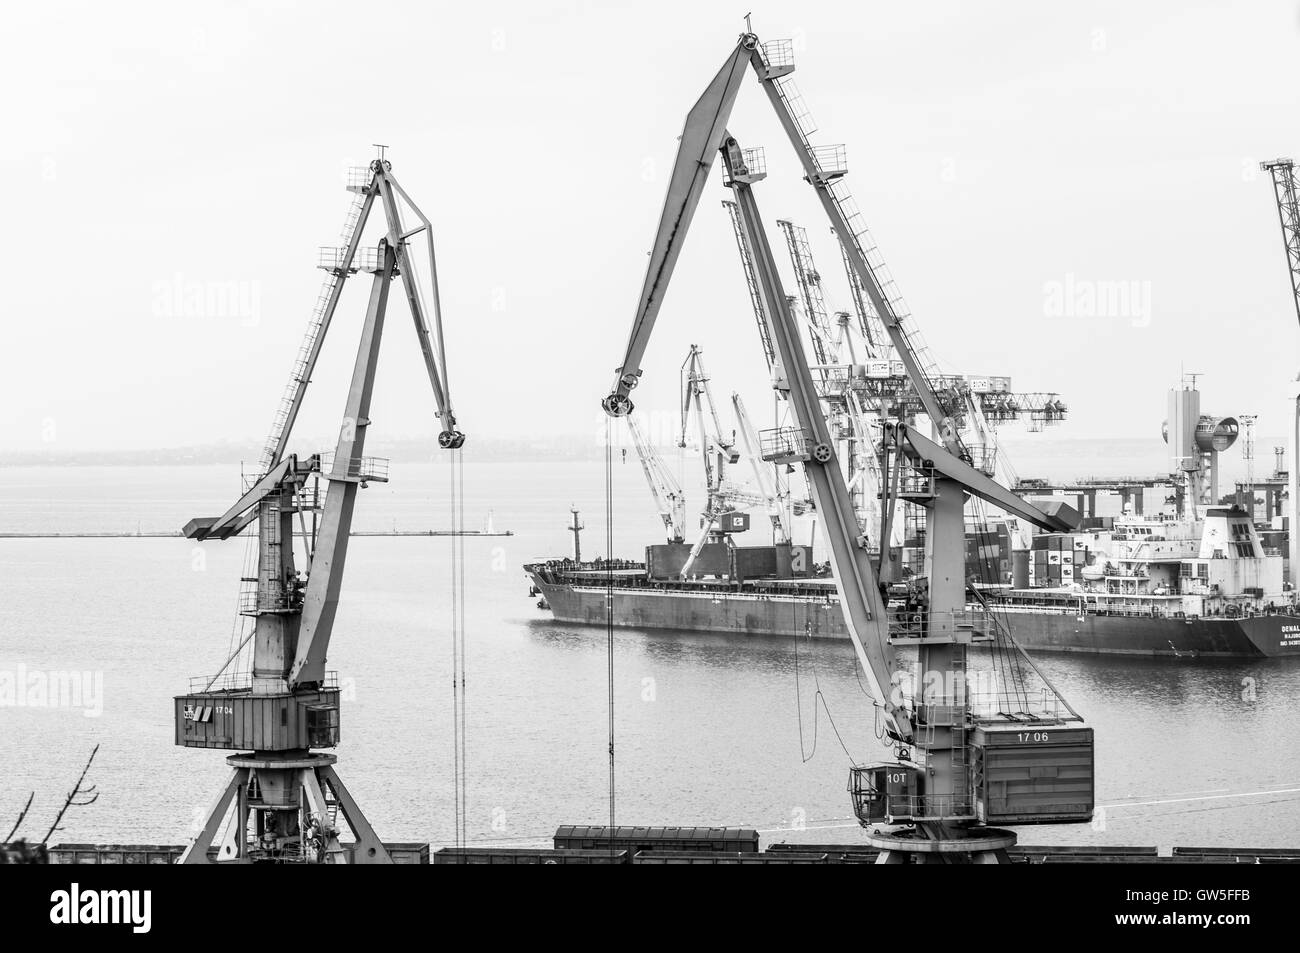 Cargo ship and Industrial cranes in Marine Trade Port Stock Photo